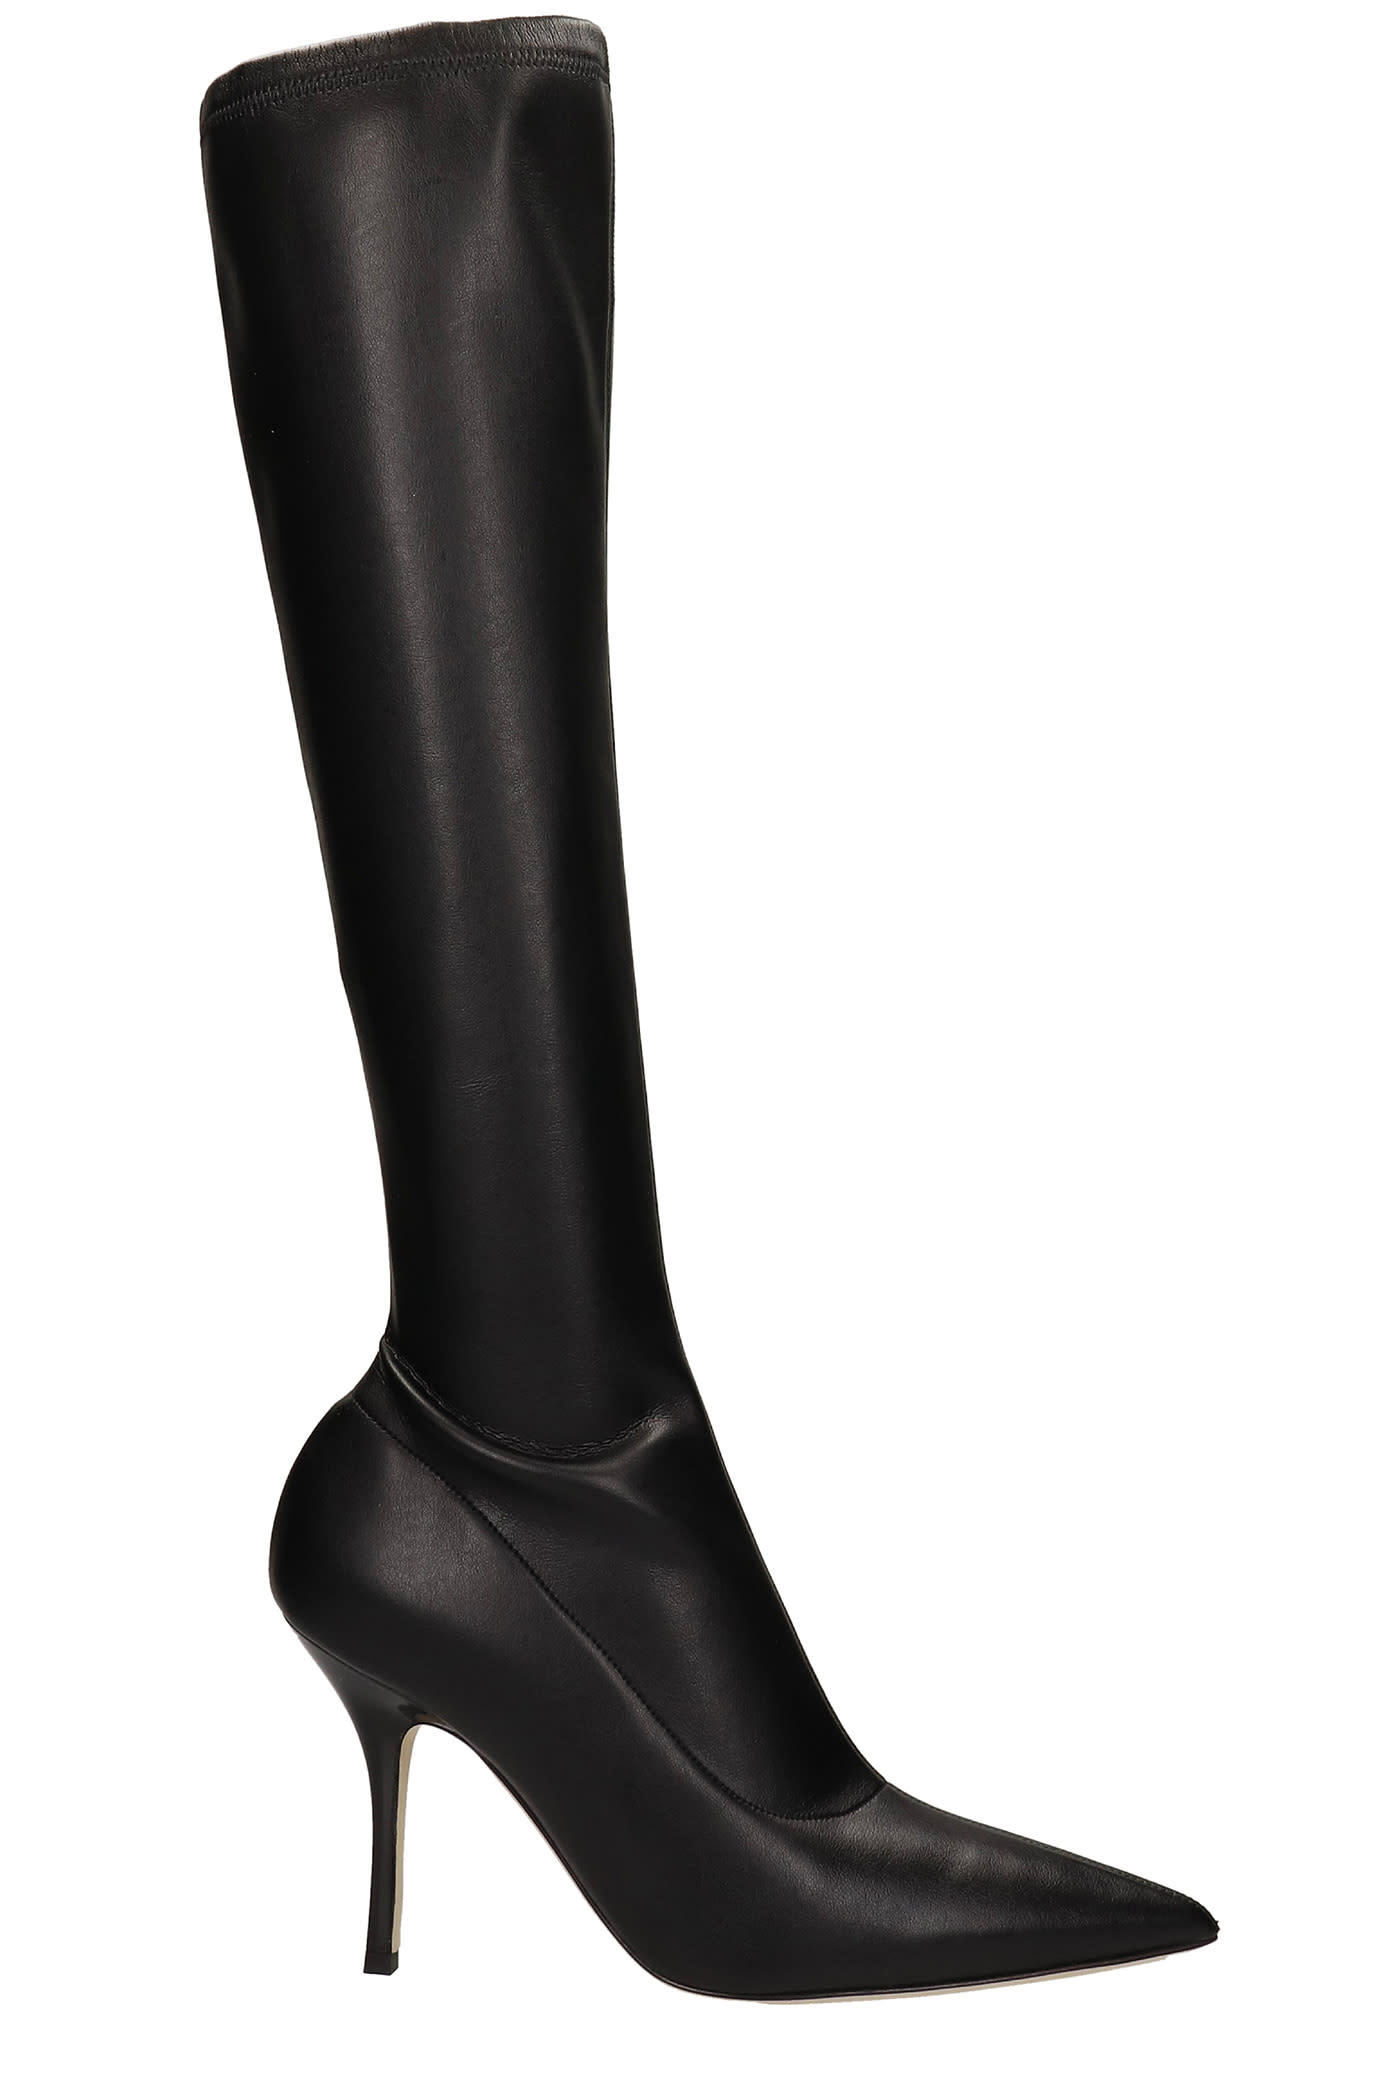 Paris Texas Mama High Heels Boots In Black Leather